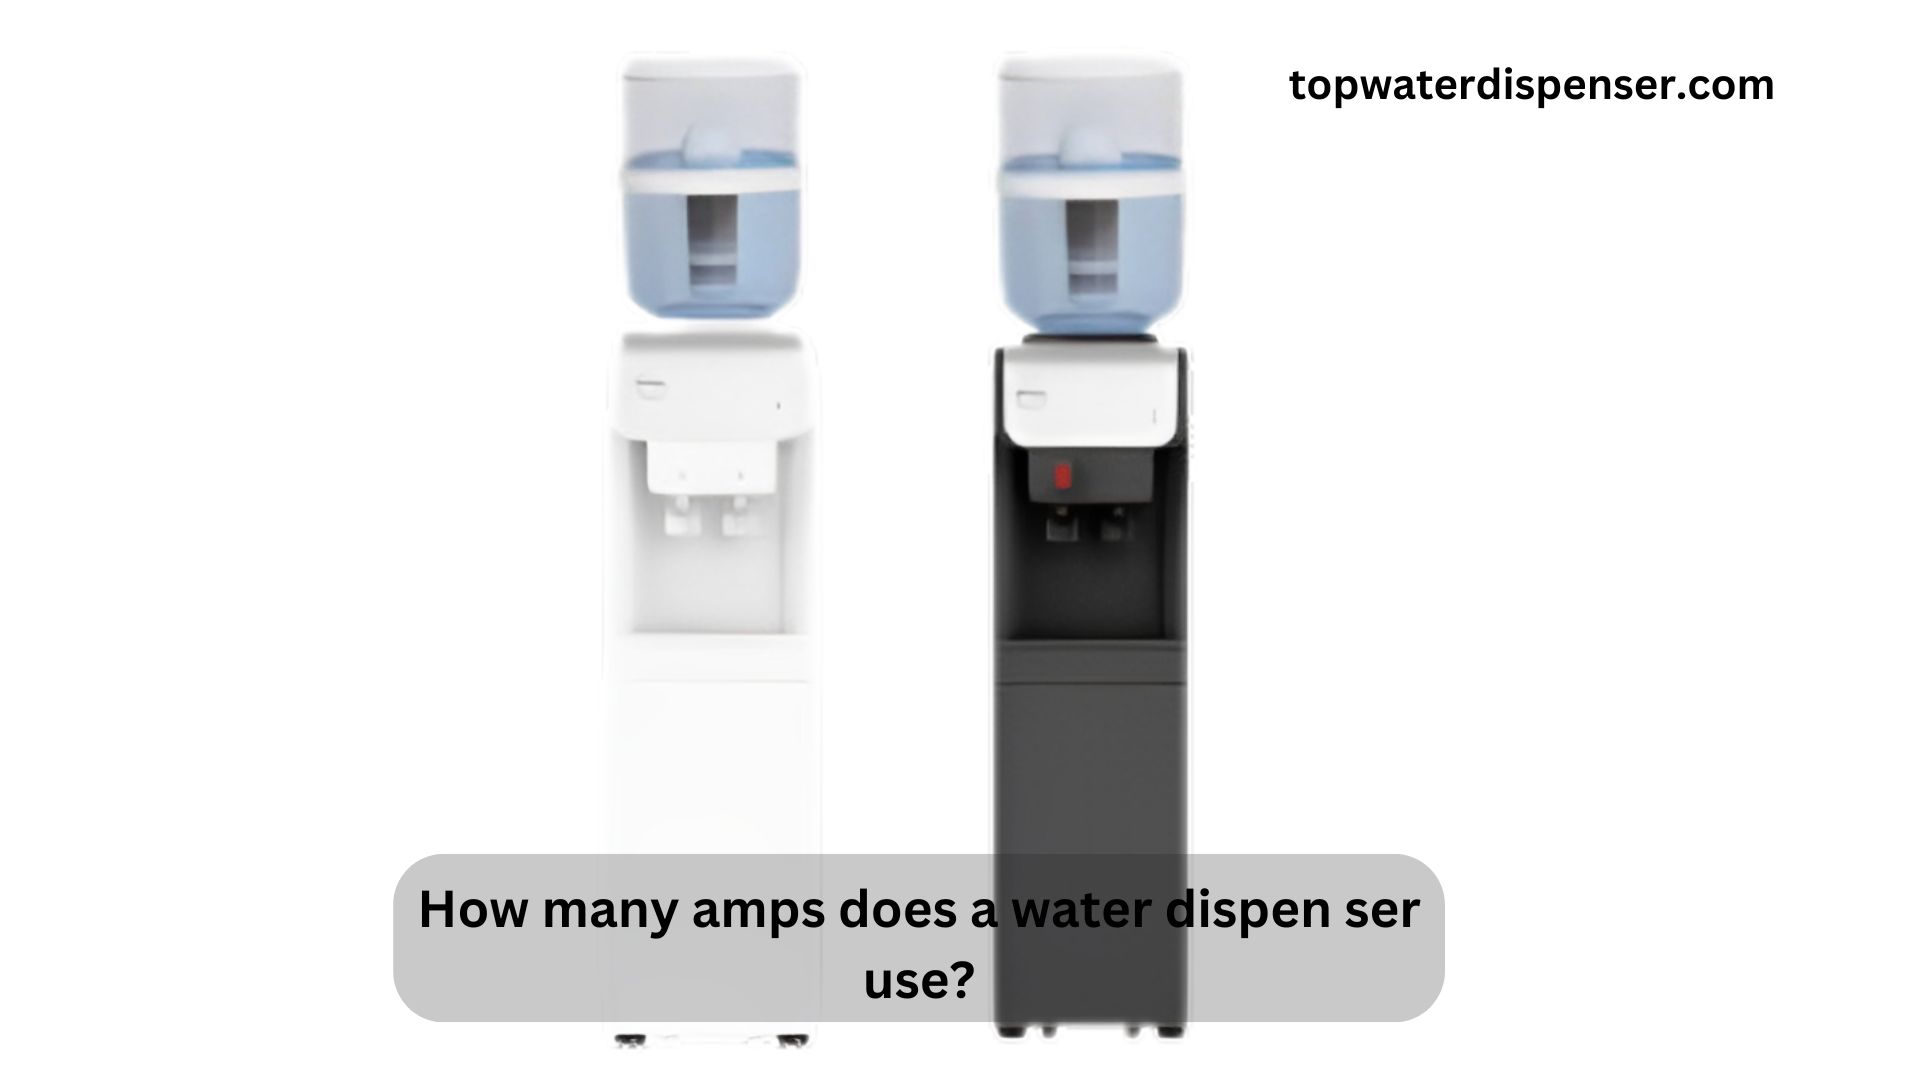 How many amps does a water dispen ser use?